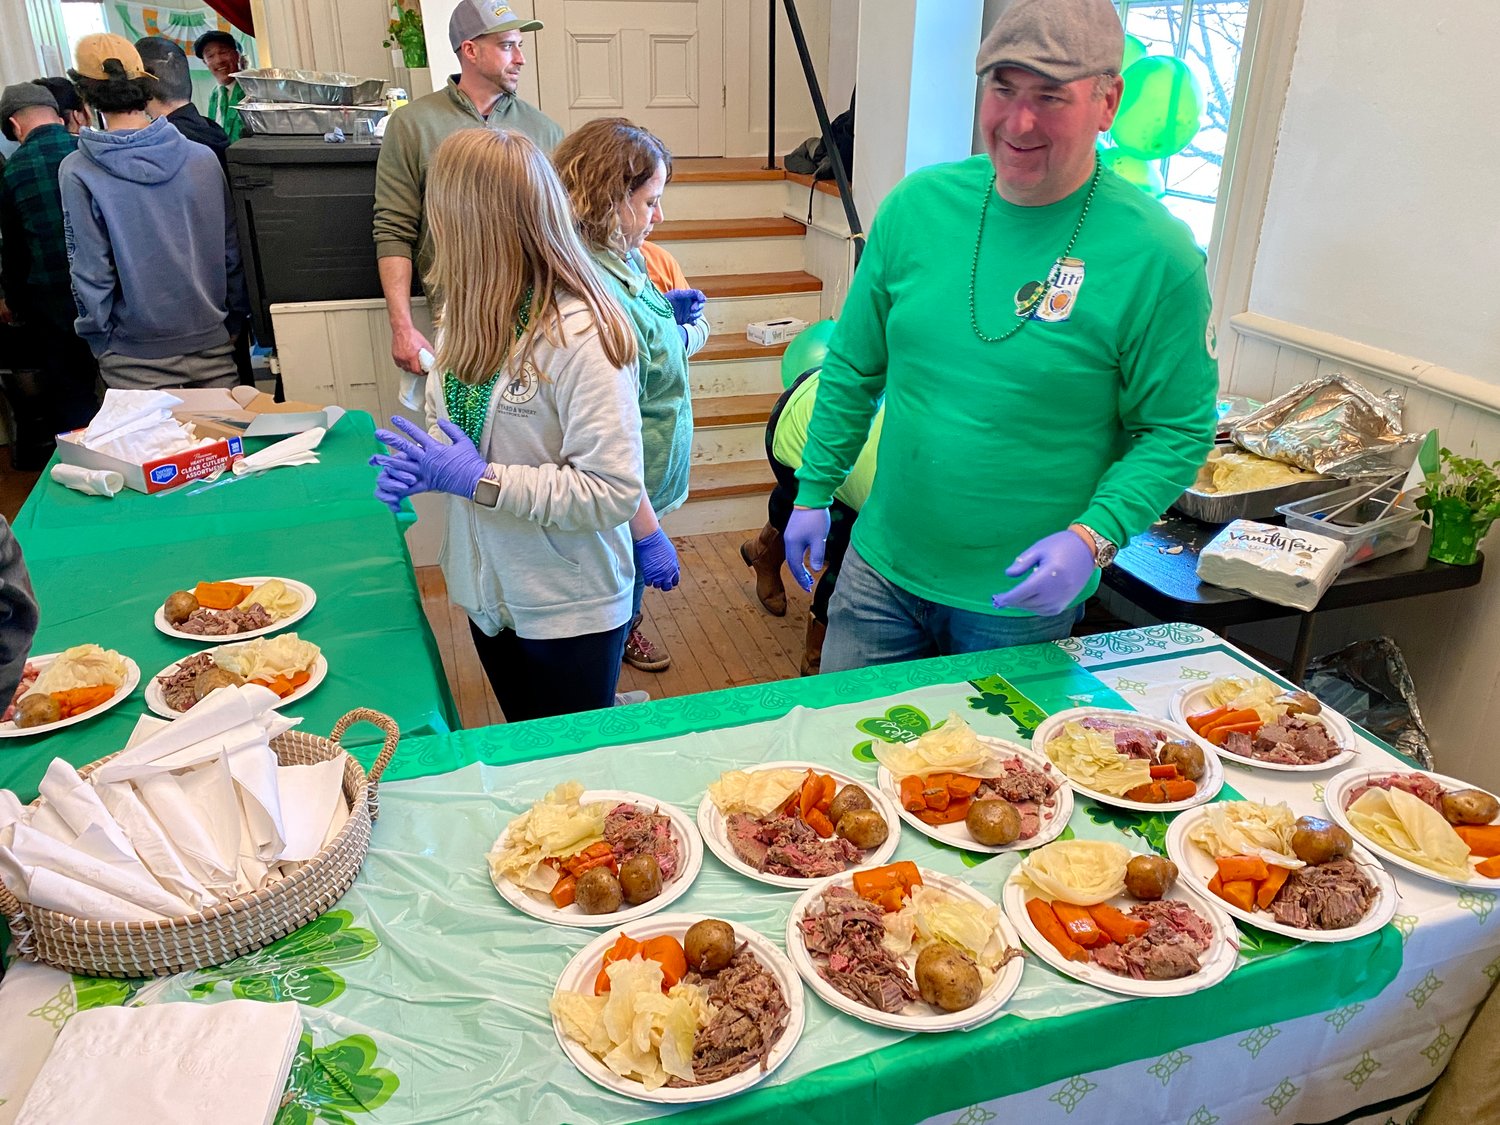 Fred Melnyk of Bootleg BBQ in Westport donated his time, cooking and serving 130 Irish dinners after the parade.